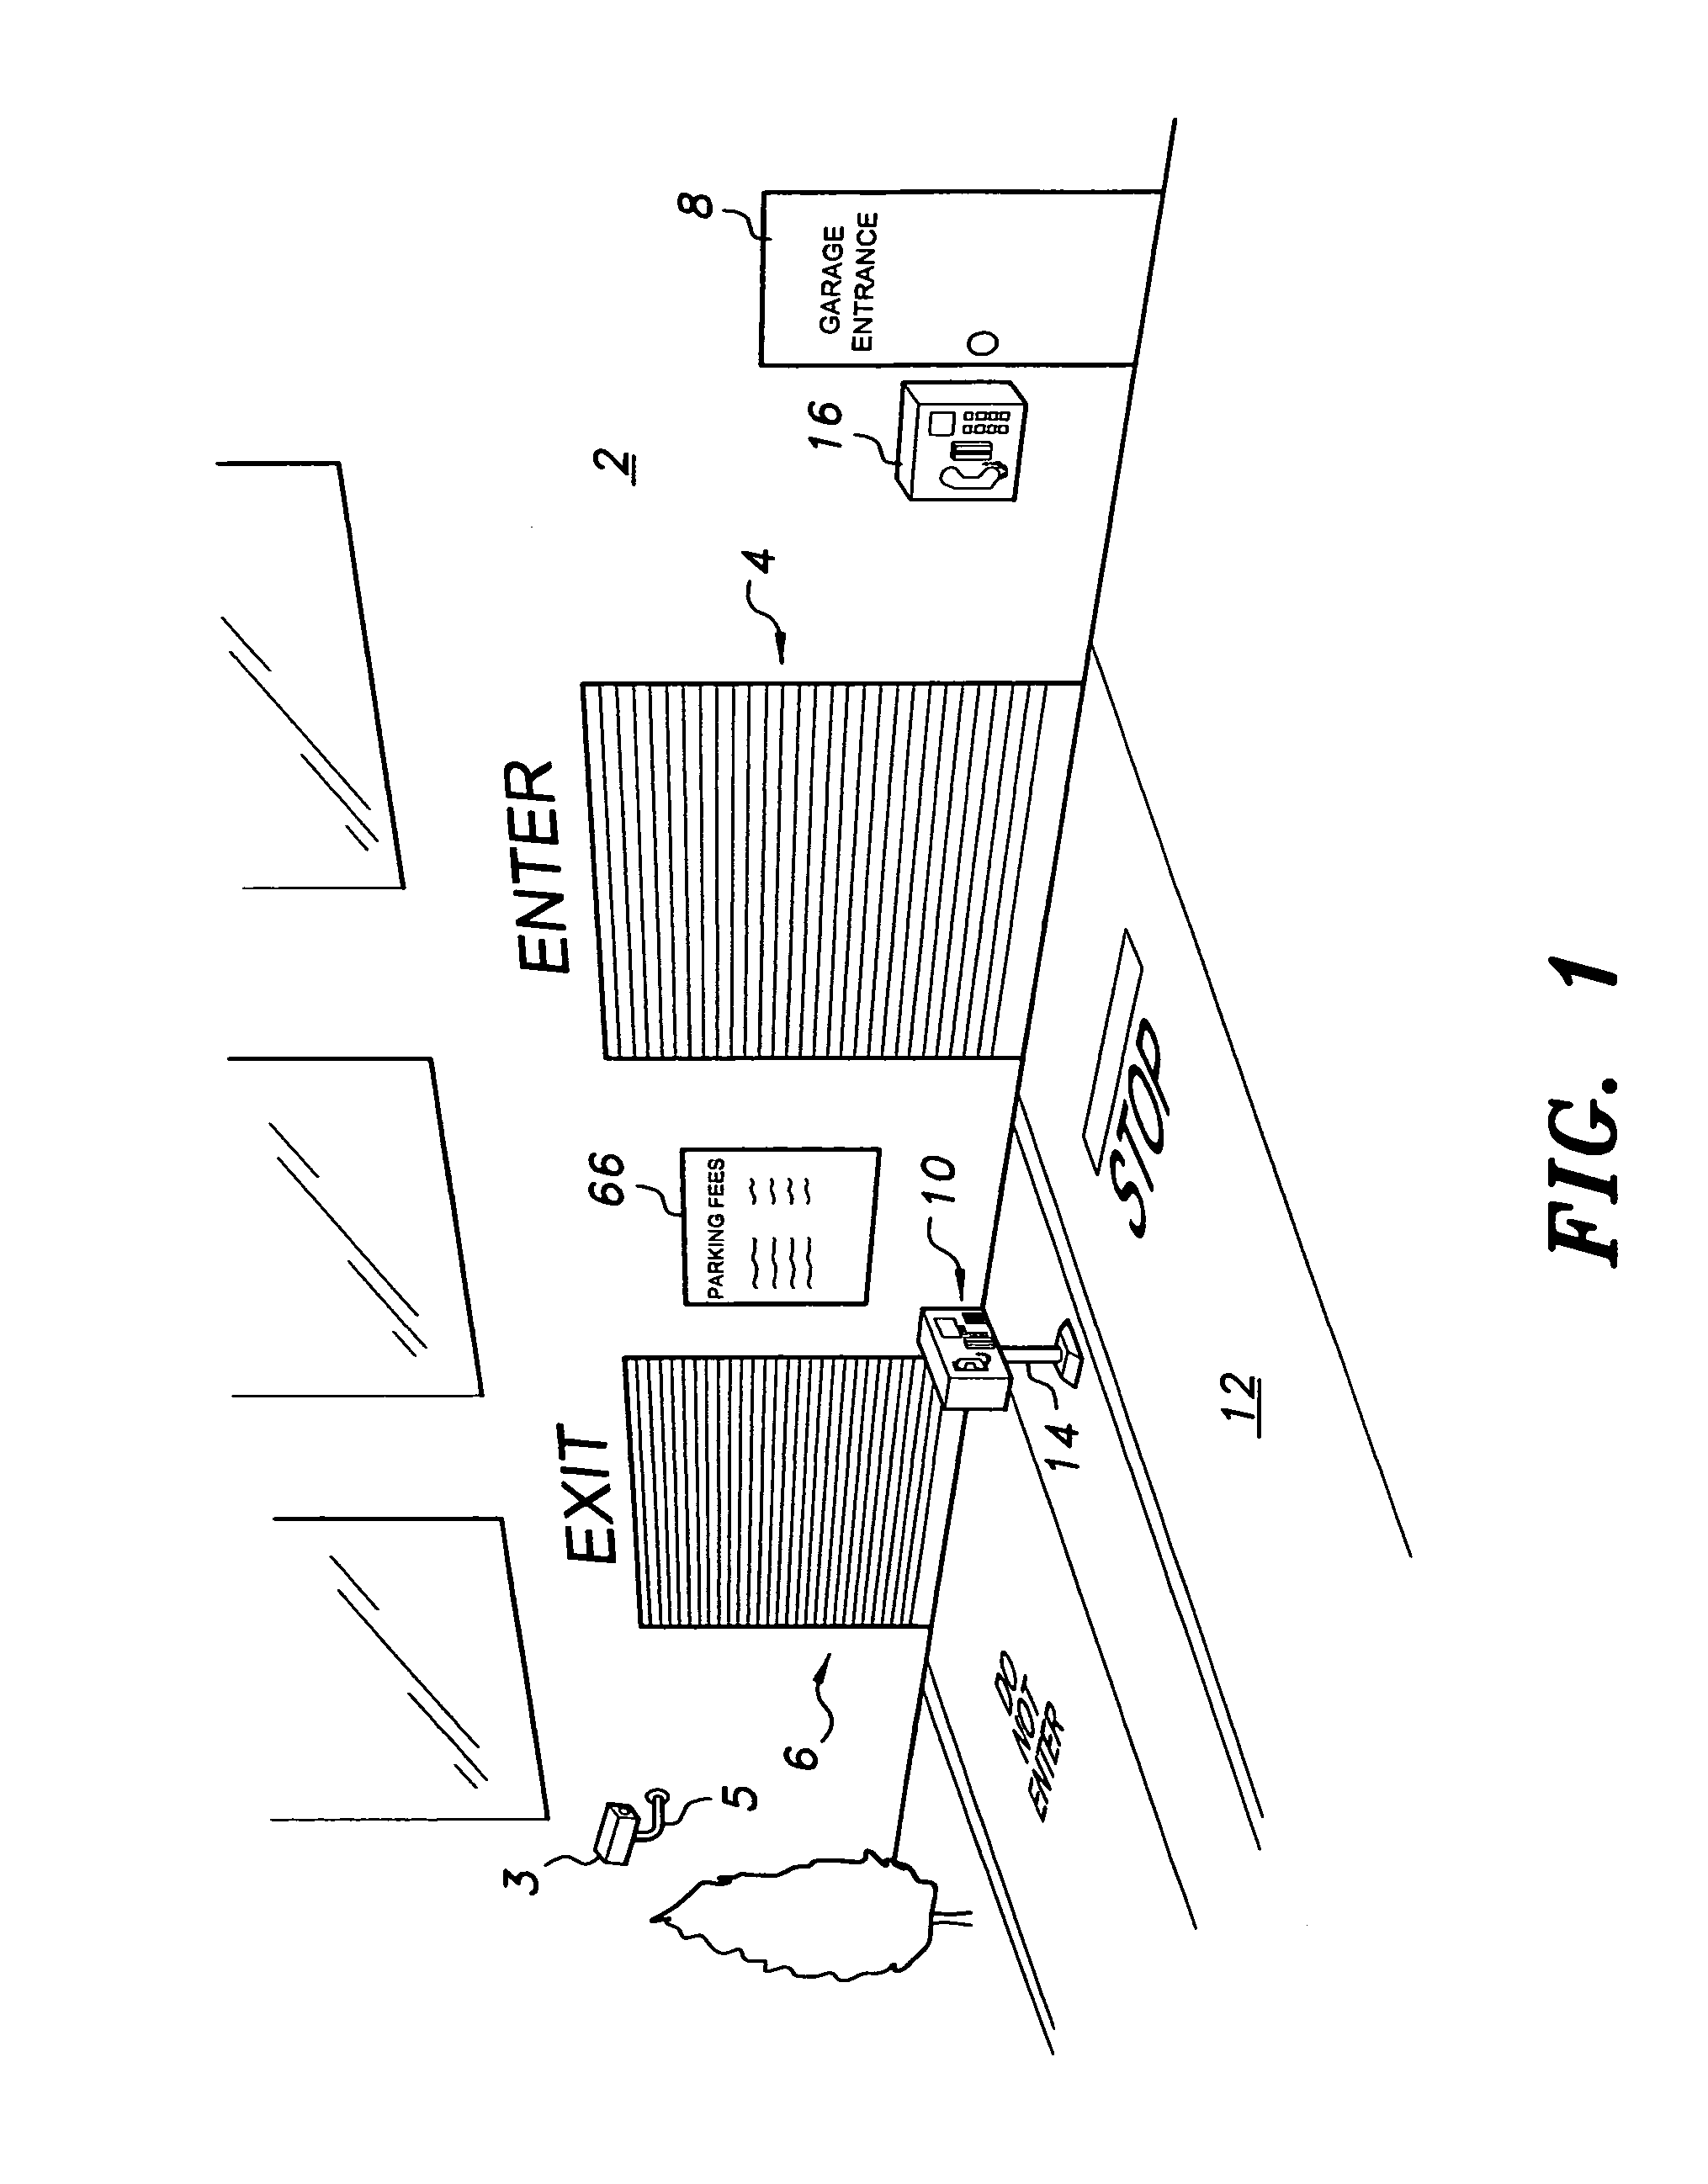 Virtual attendant system and parking management system